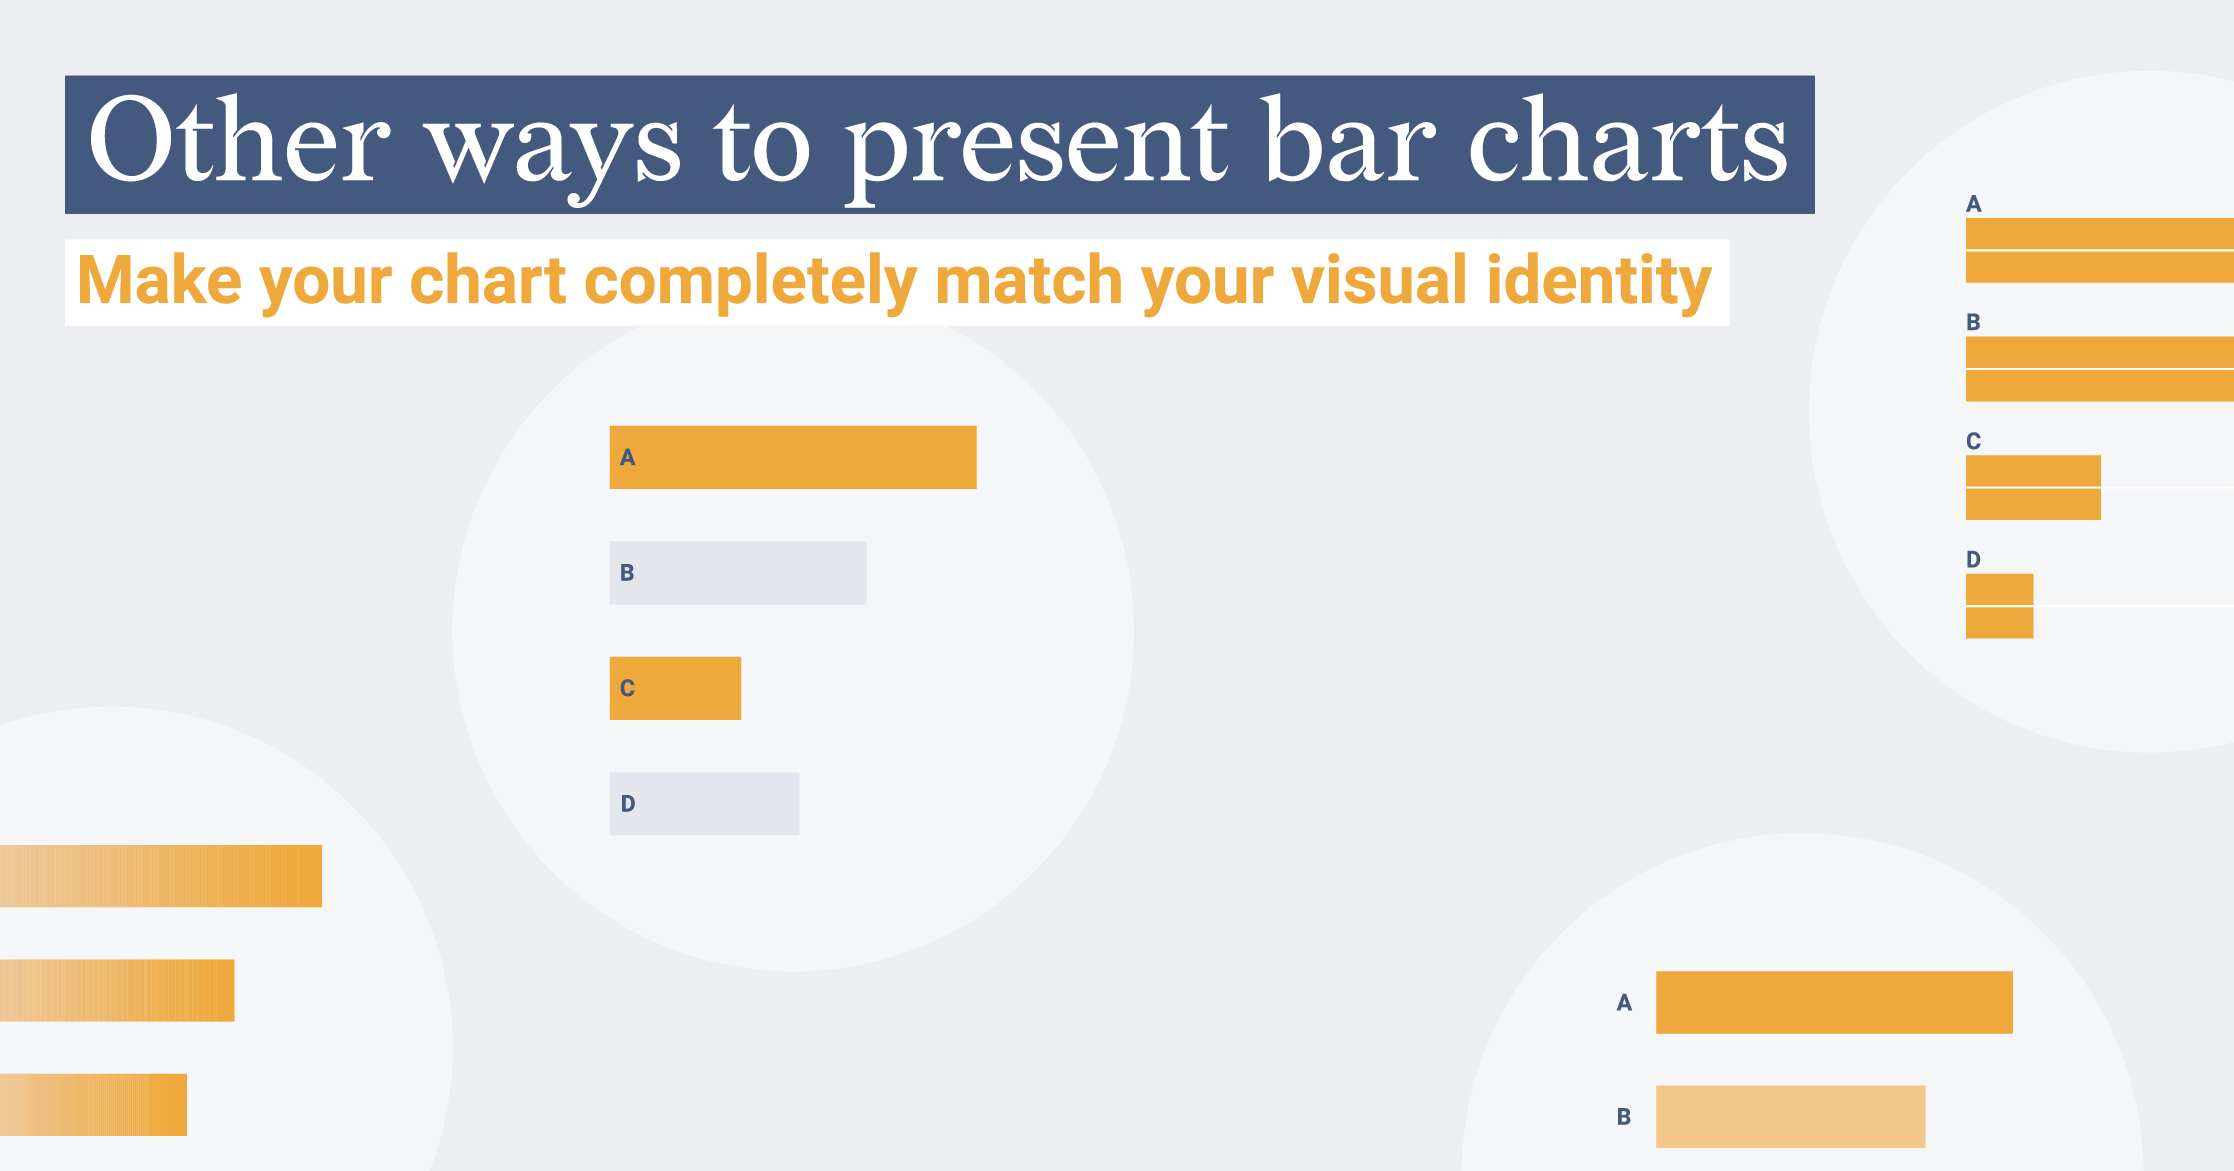 How to present bar charts